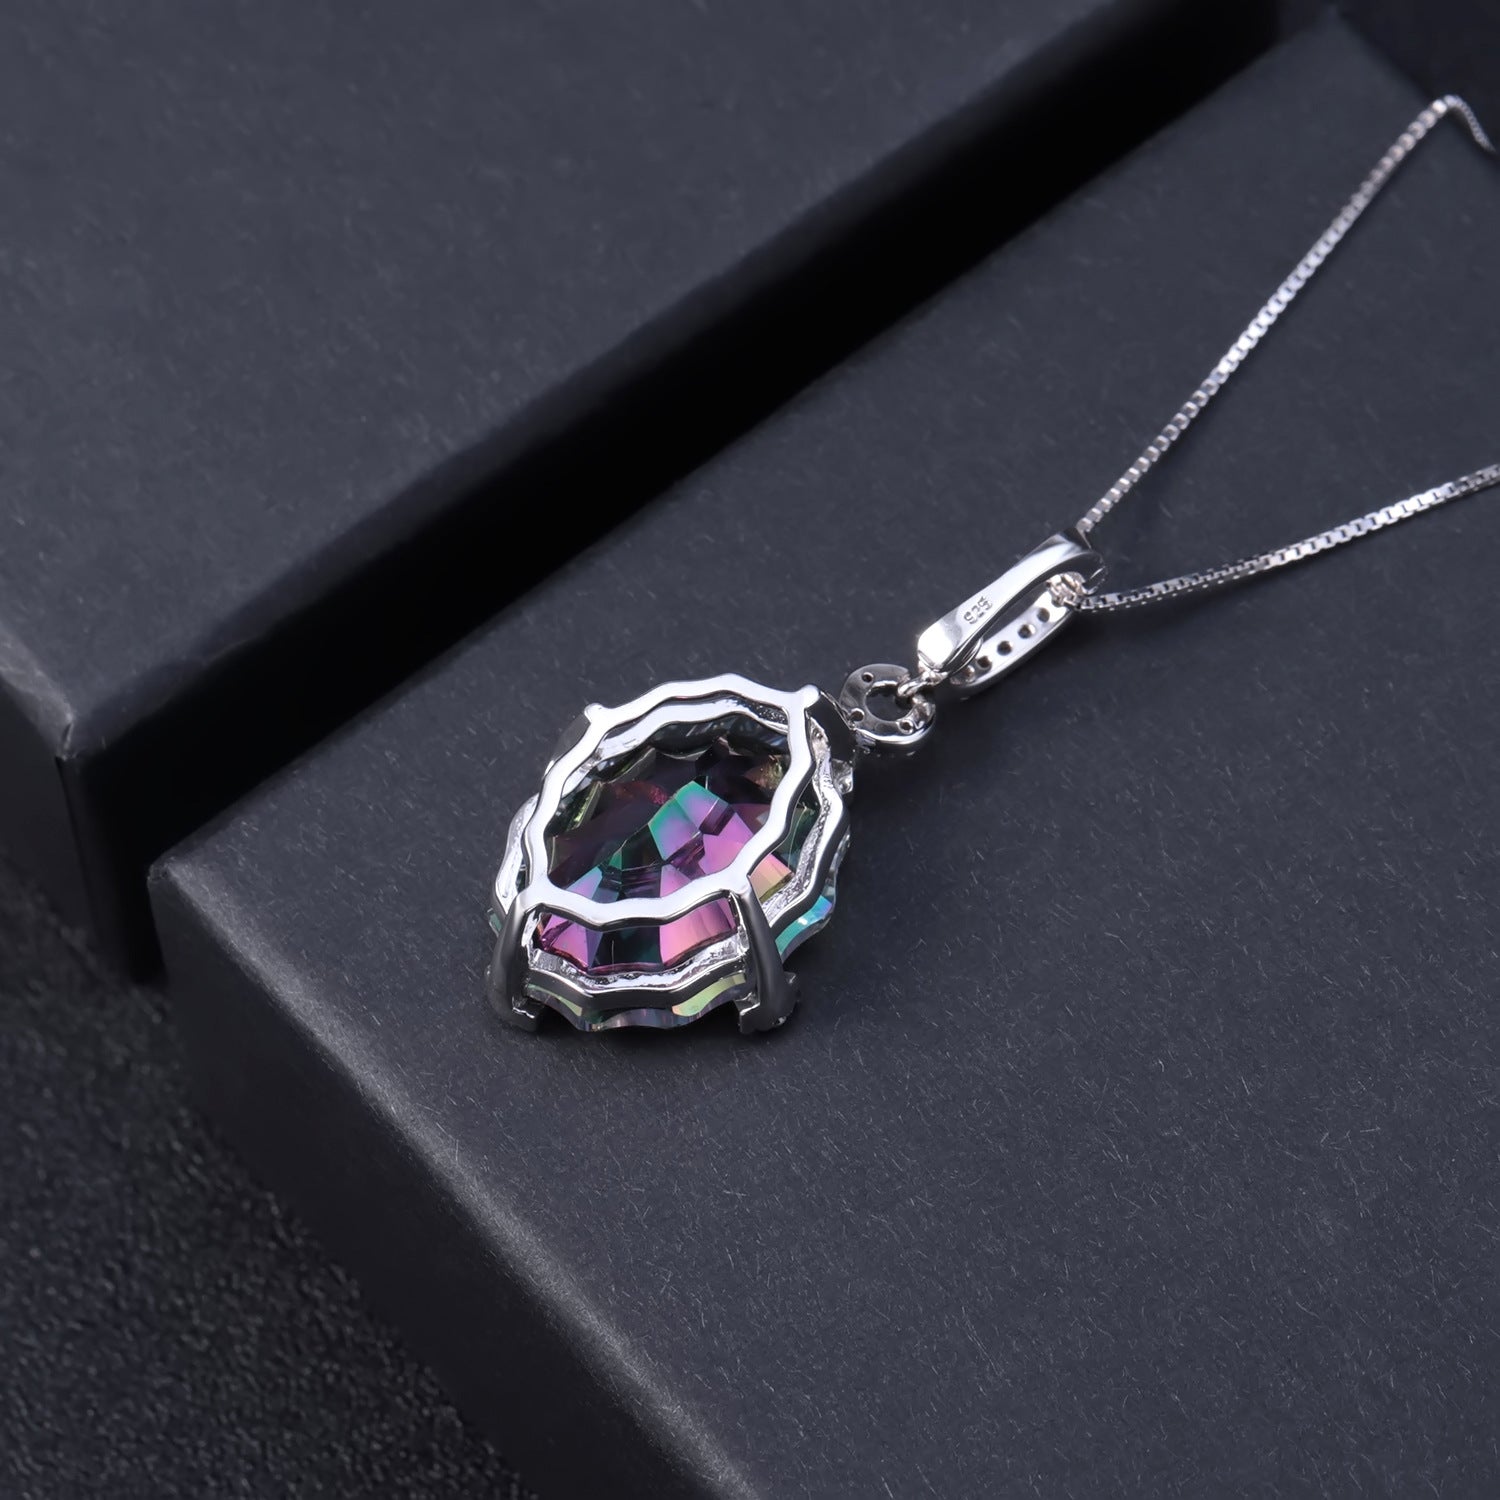 Crystal Pendant Silver Necklace for Women